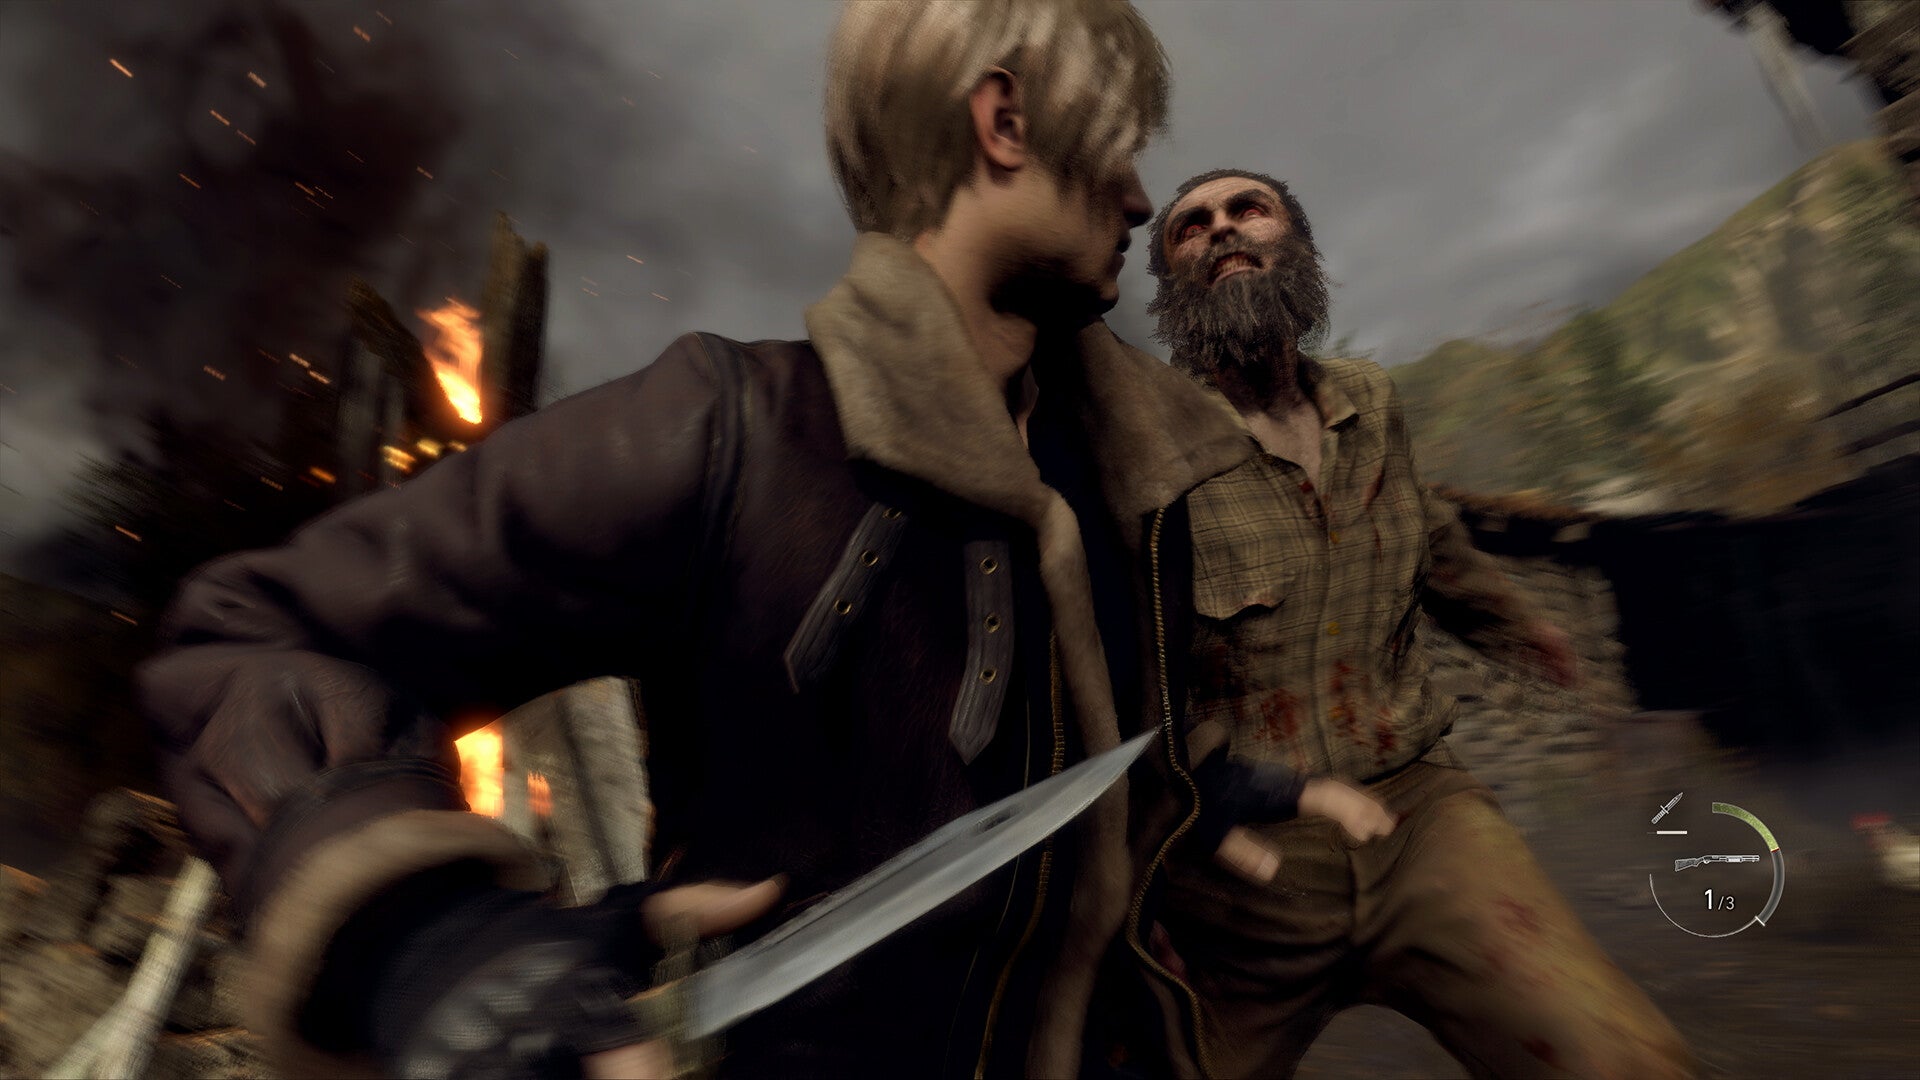 Leon knife-fights an infected villager in a Resident Evil 4 remake combat encounter.